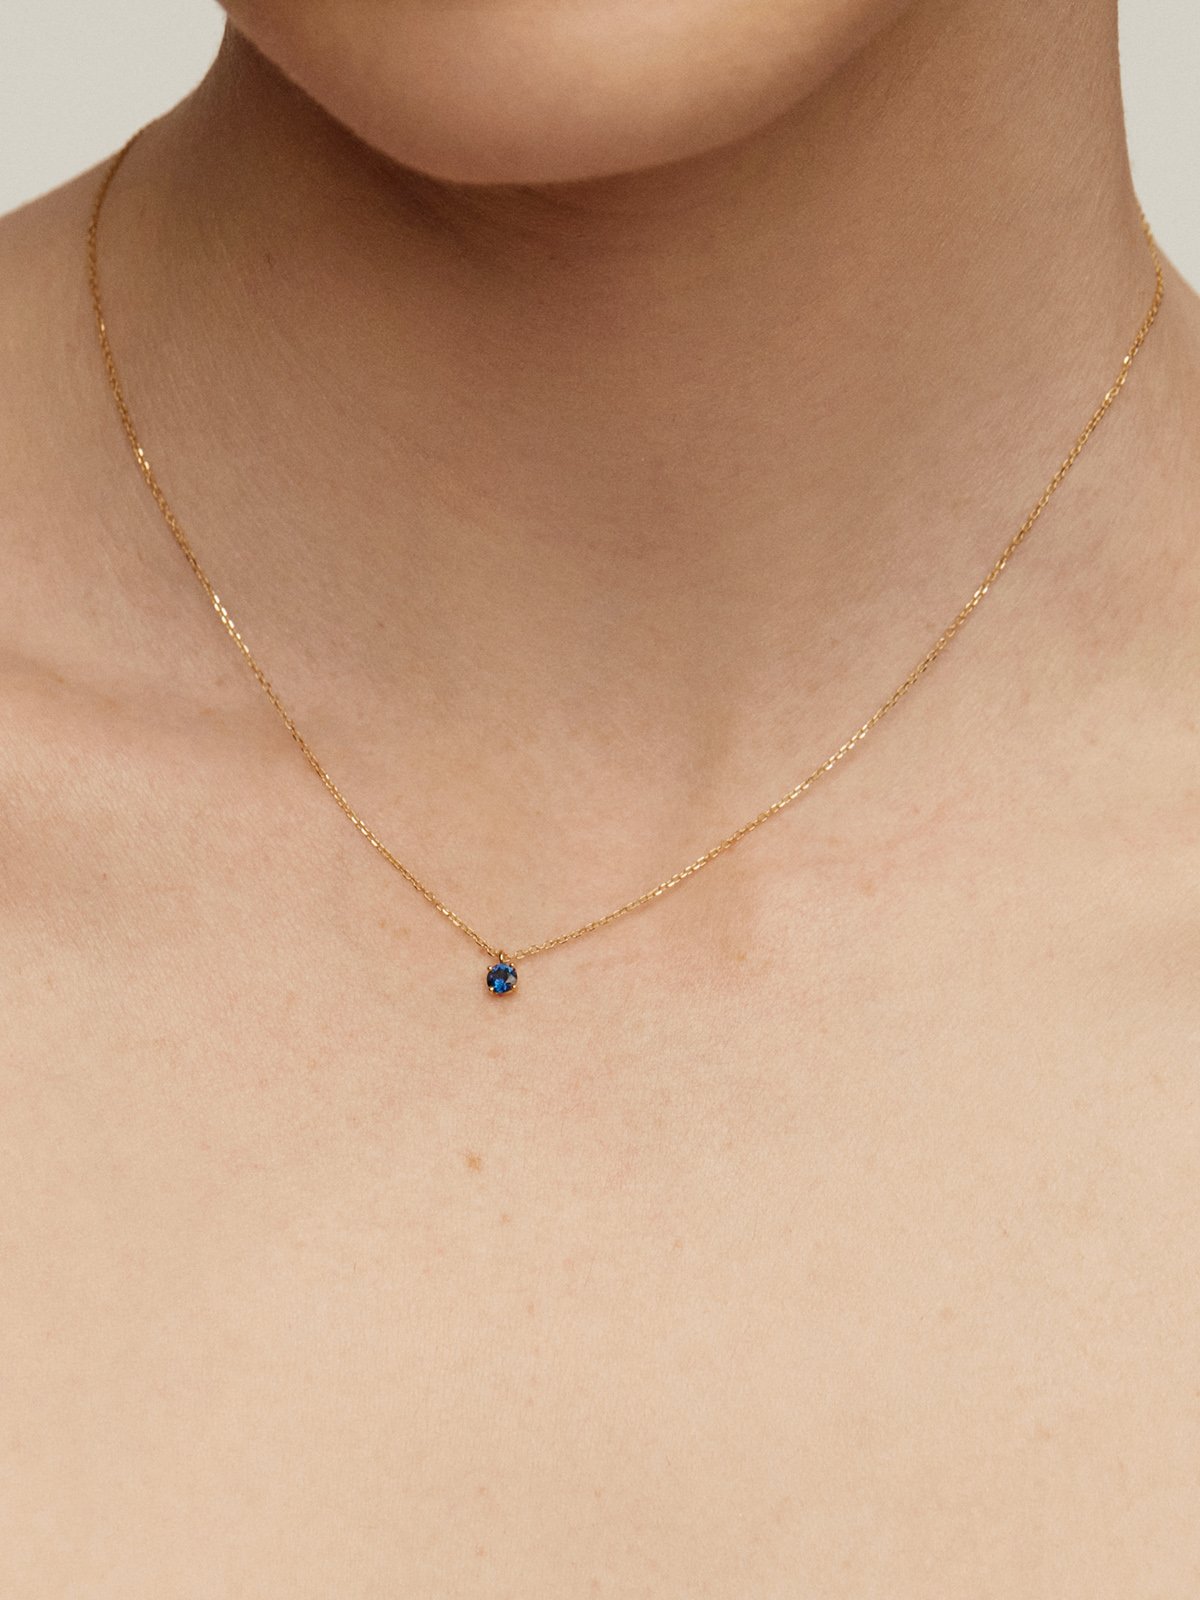 9K yellow gold pendant with blue sapphire